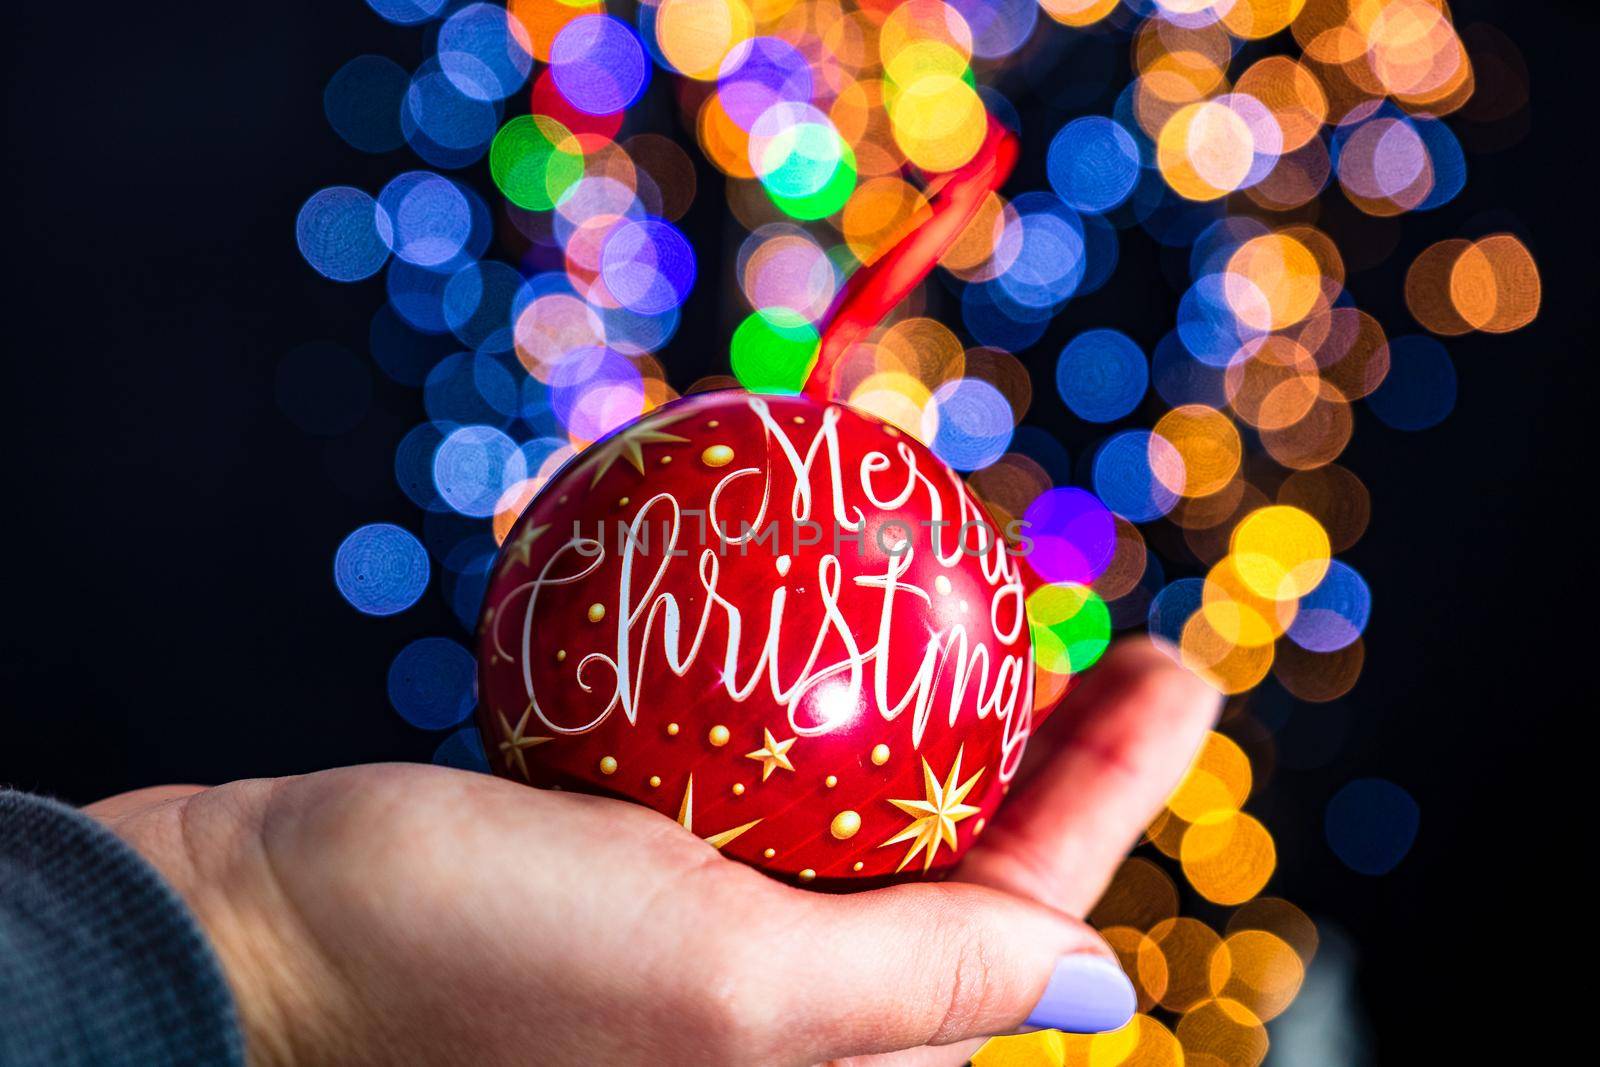 Holding Merry Christmas bauble decoration isolated on background with blurred lights. December season, Christmas composition.